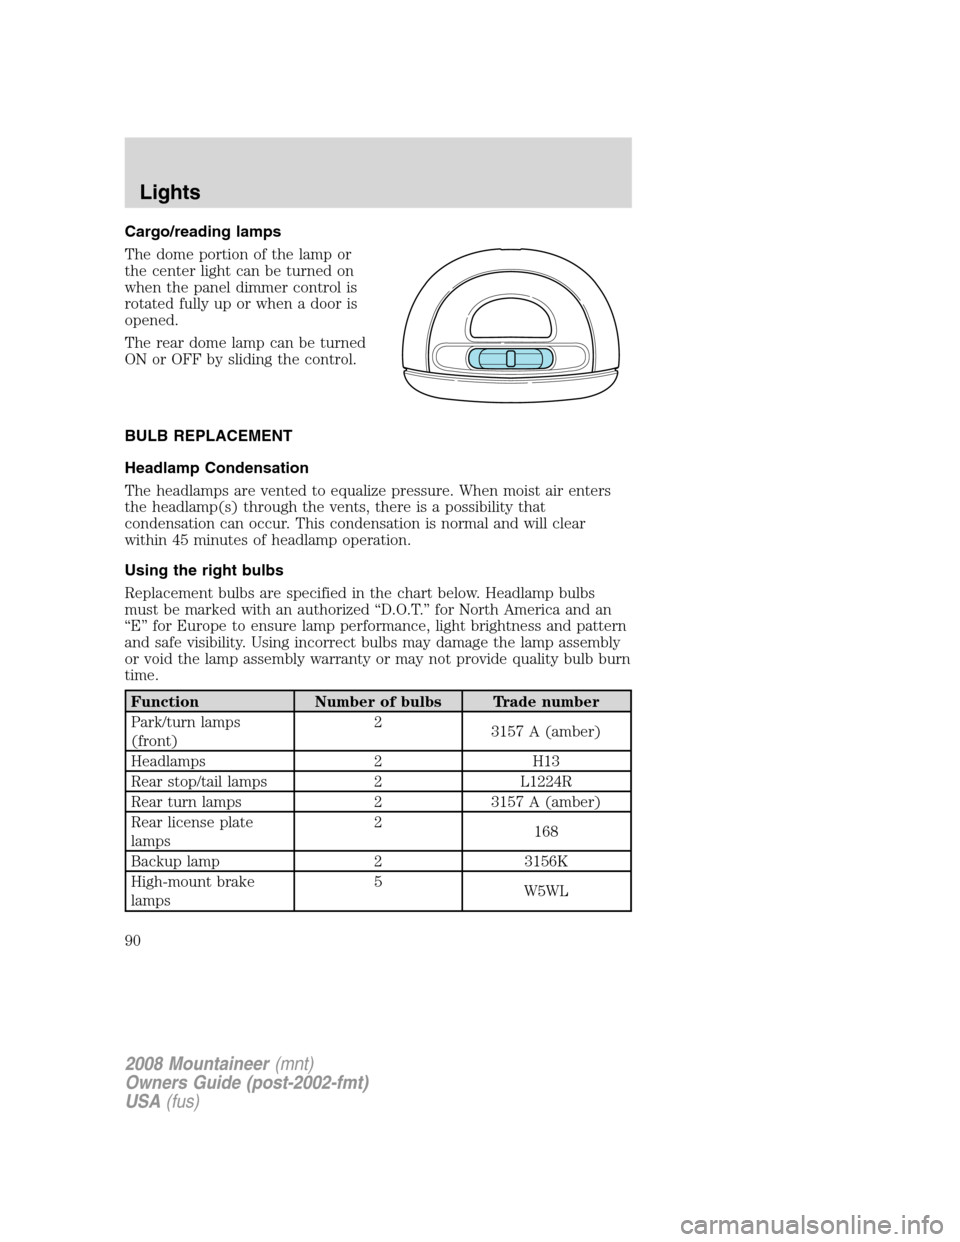 Mercury Mountaineer 2008  Owners Manuals Cargo/reading lamps
The dome portion of the lamp or
the center light can be turned on
when the panel dimmer control is
rotated fully up or when a door is
opened.
The rear dome lamp can be turned
ON or